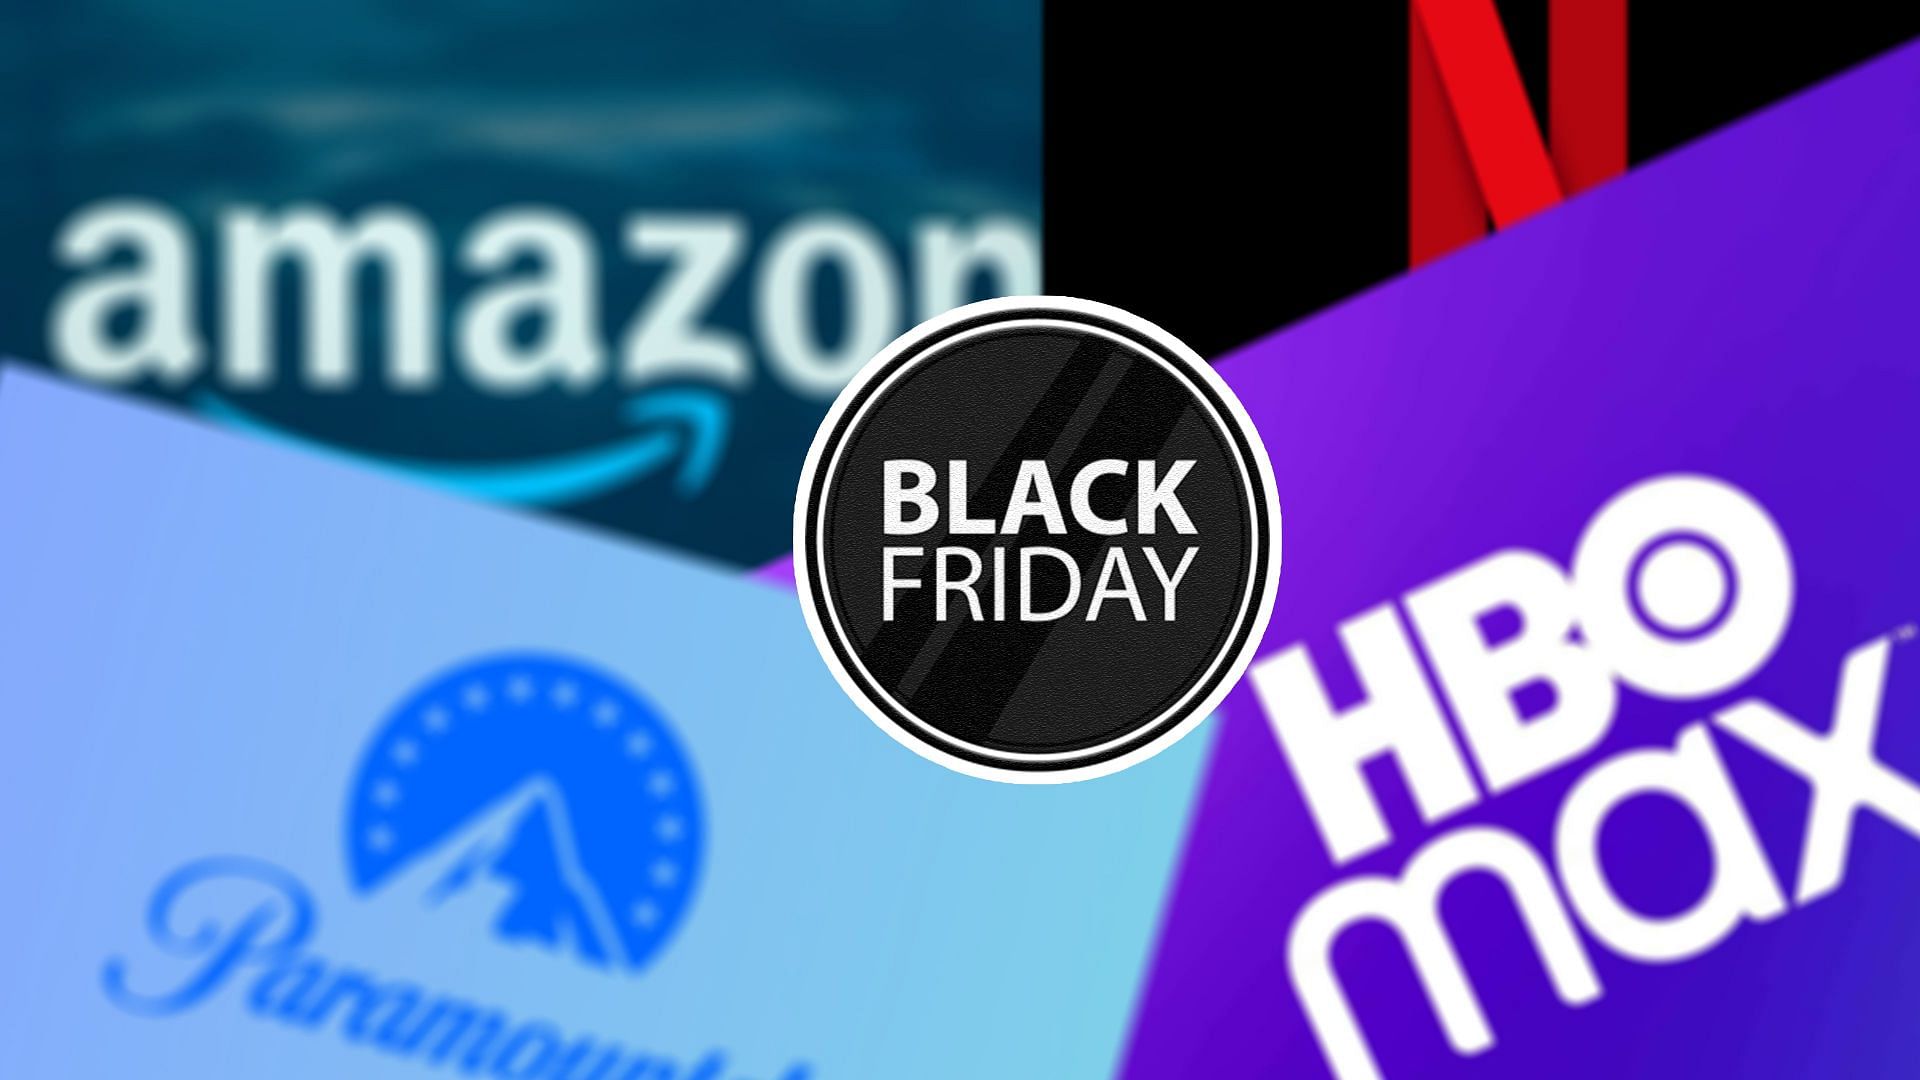 It's Your Last Day to Get HBO Max's Black Friday Deal, Which Gets You 3  Months of Streaming for $1.99 a Month